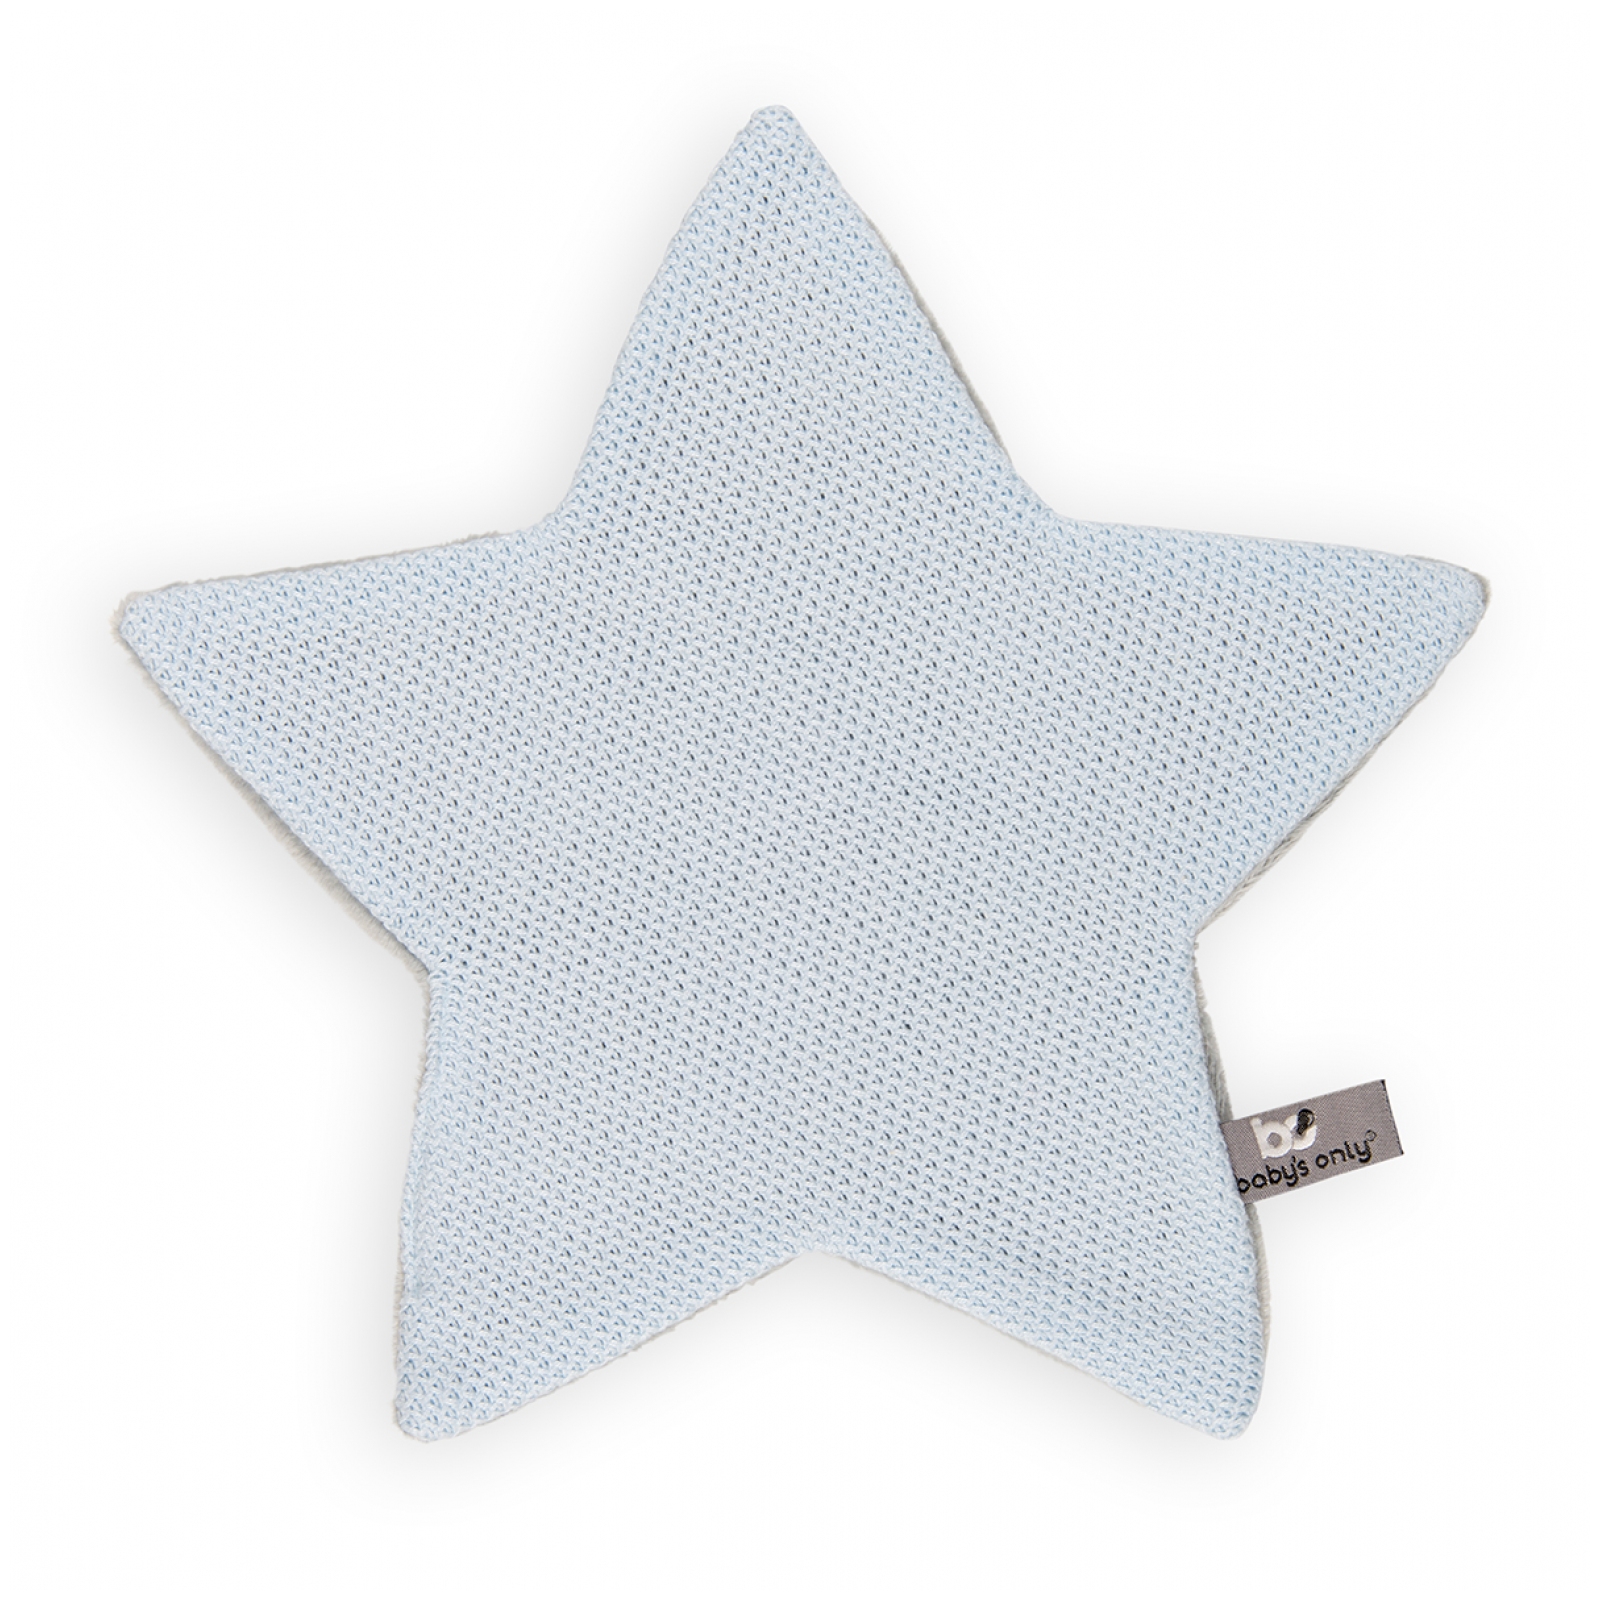 Baby's Only Cuddle Cloth Star Classic - 30x30 cm.